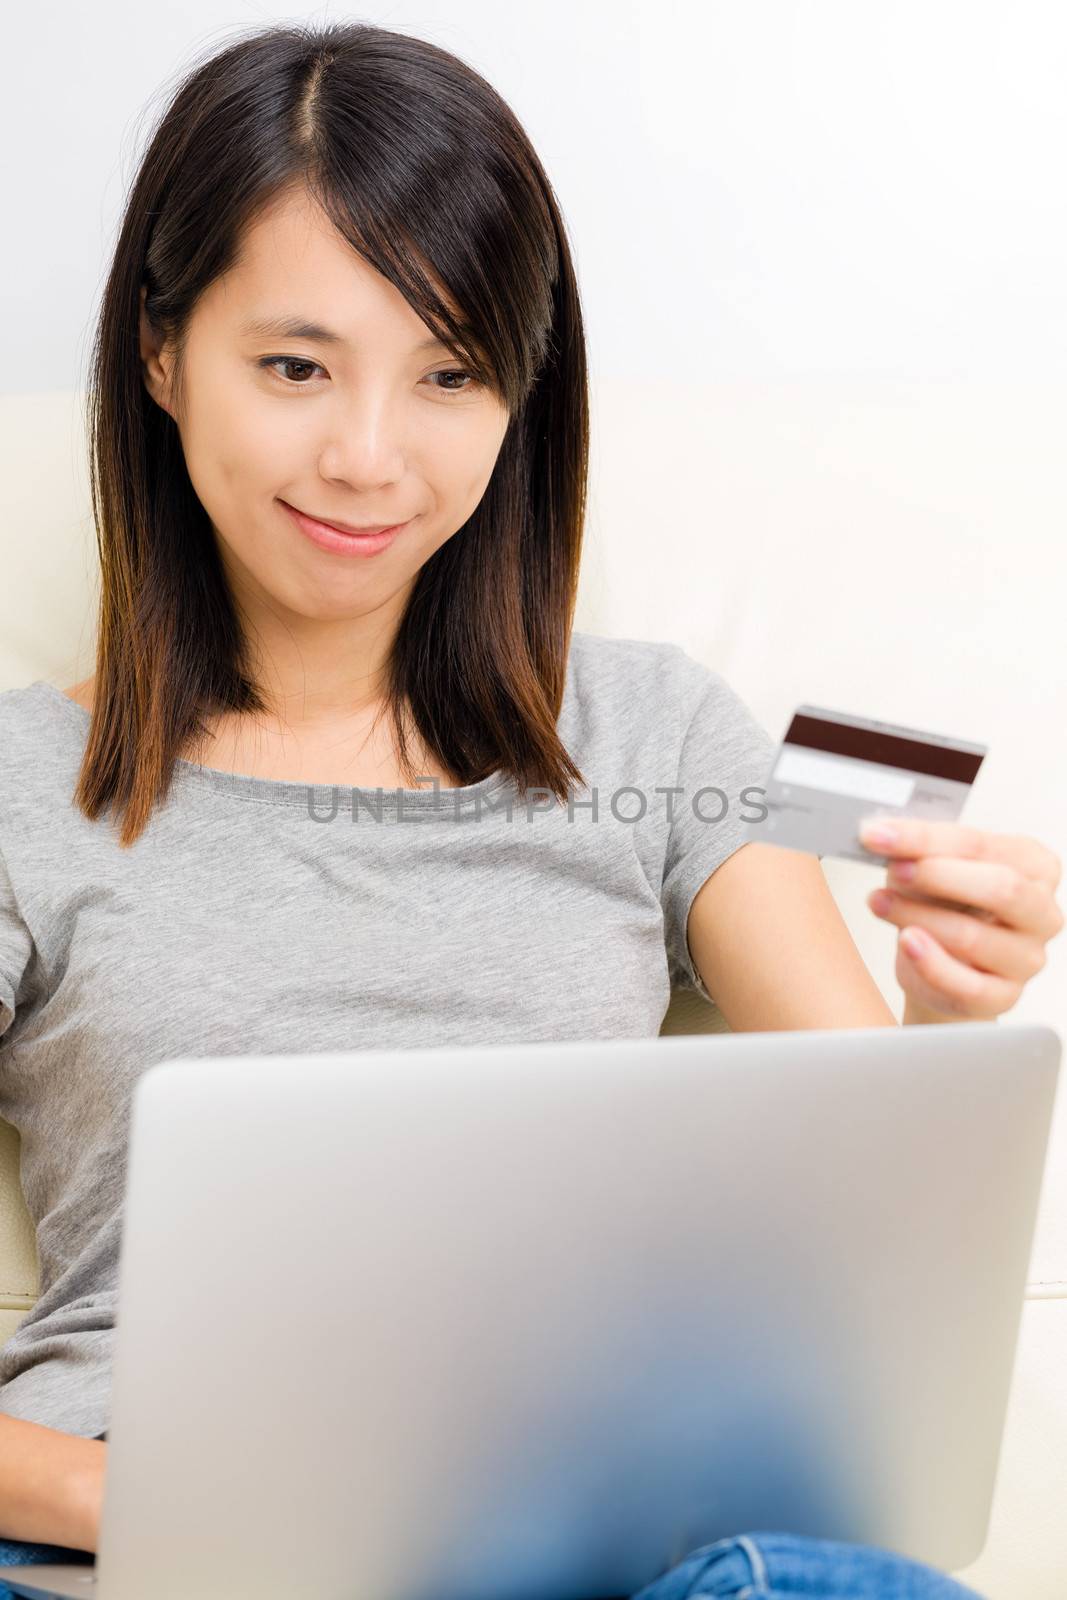 Asian woman using laptop for online shopping